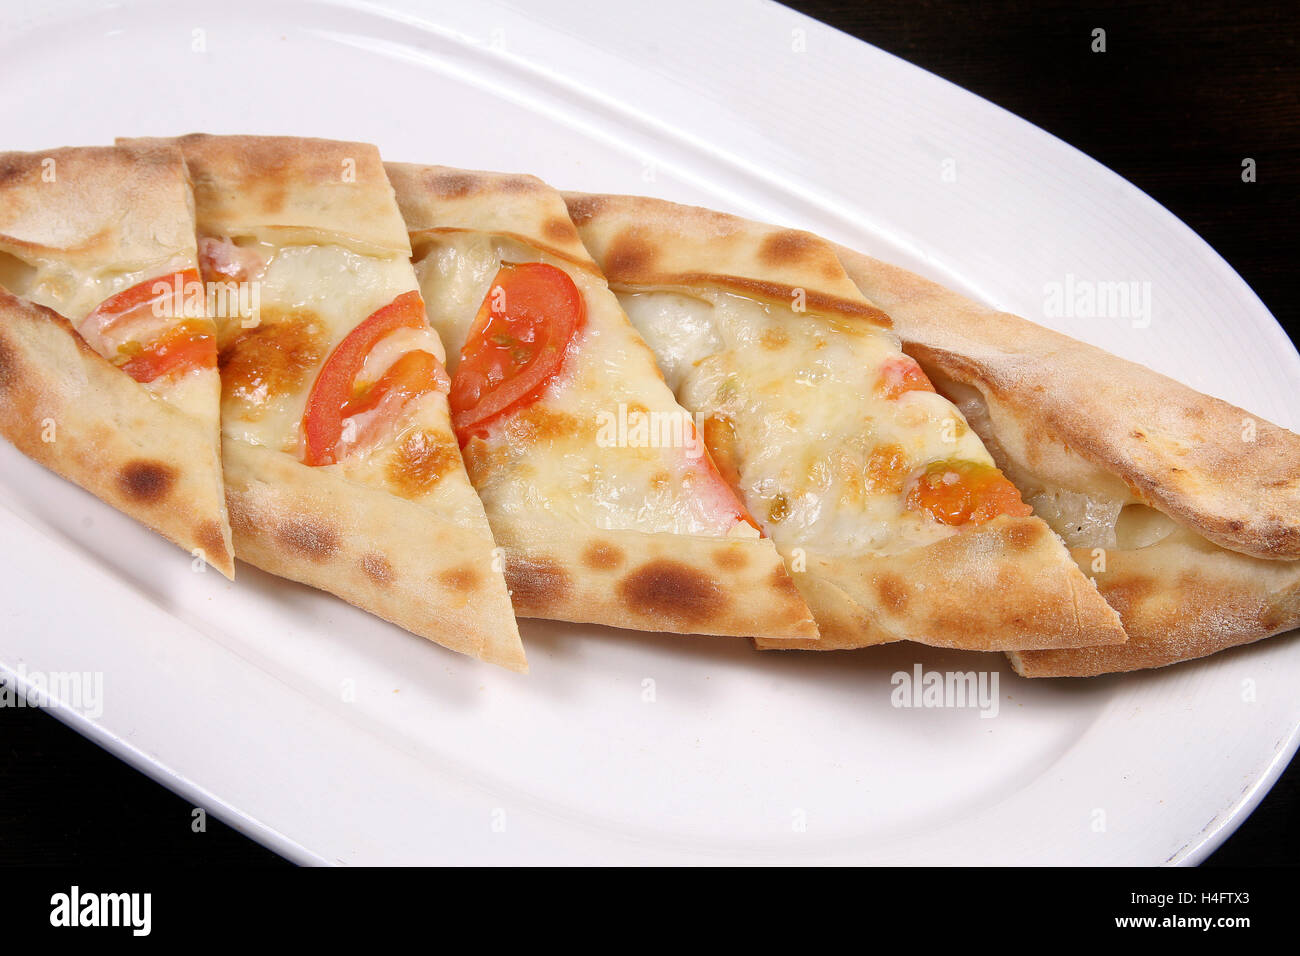 Turkish pizza (pide) tomatoes and cheddar cheese Stock Photo